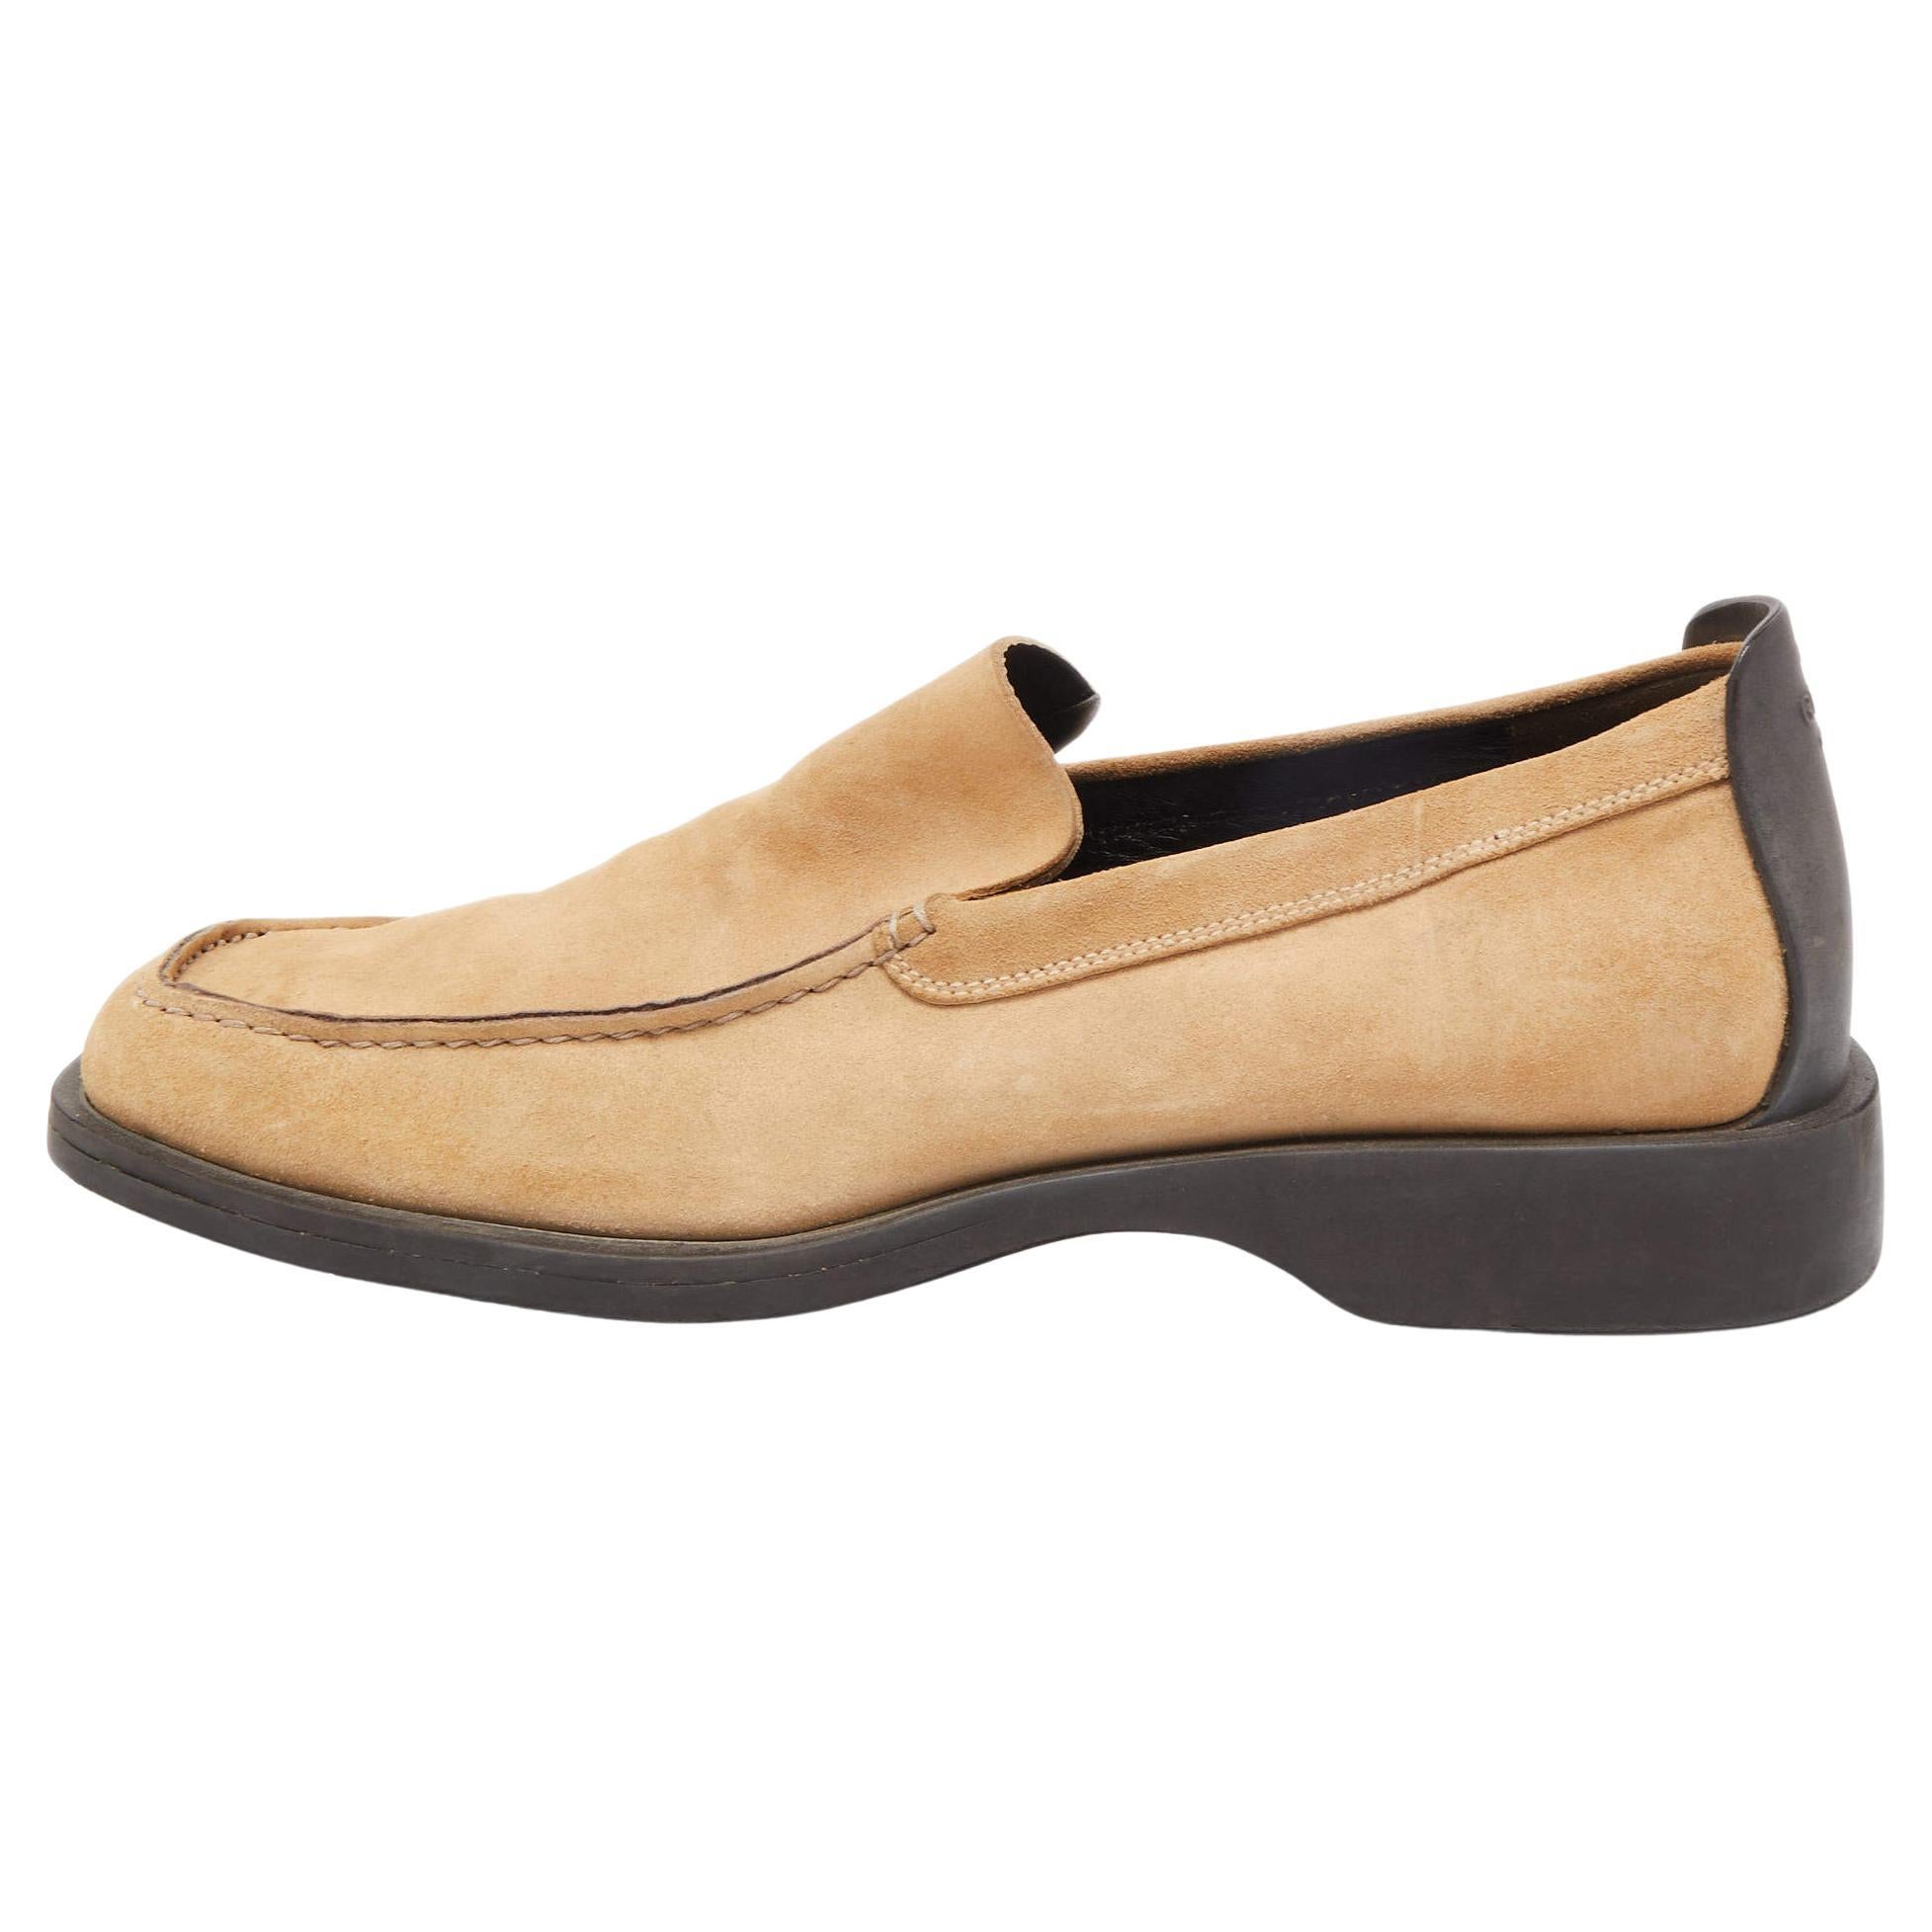 Gucci Beige Suede Slip On Loafers Size 43.5 For Sale